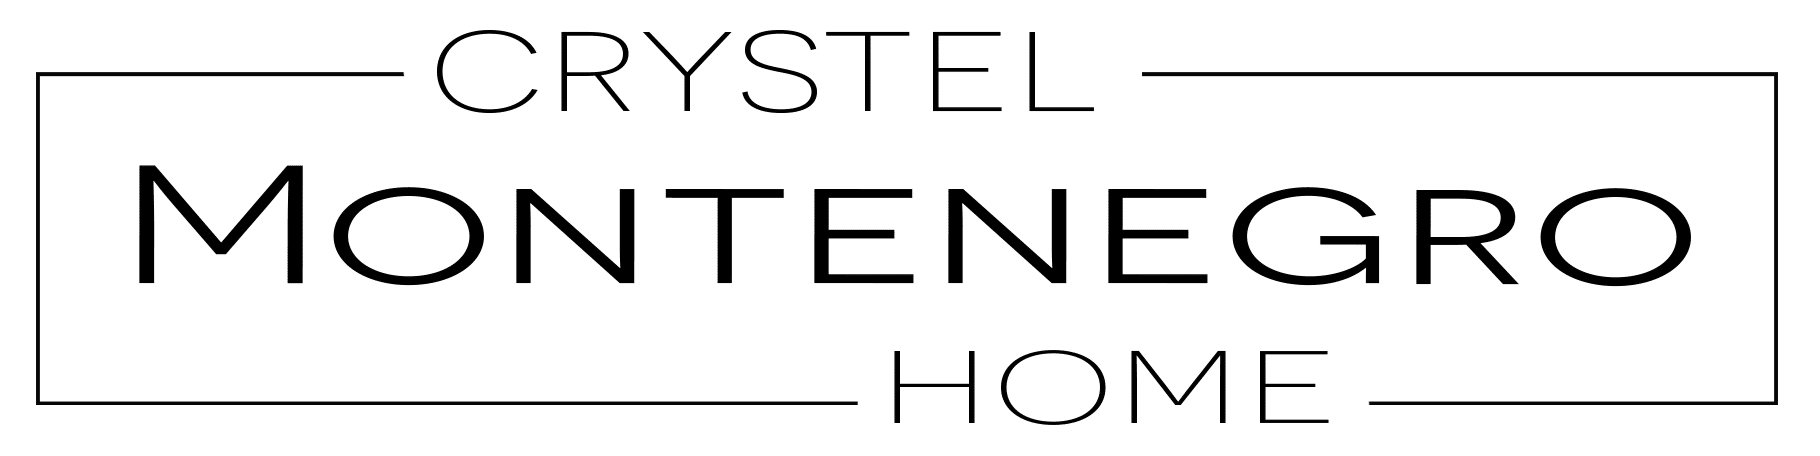 Crystel Montenegro Home